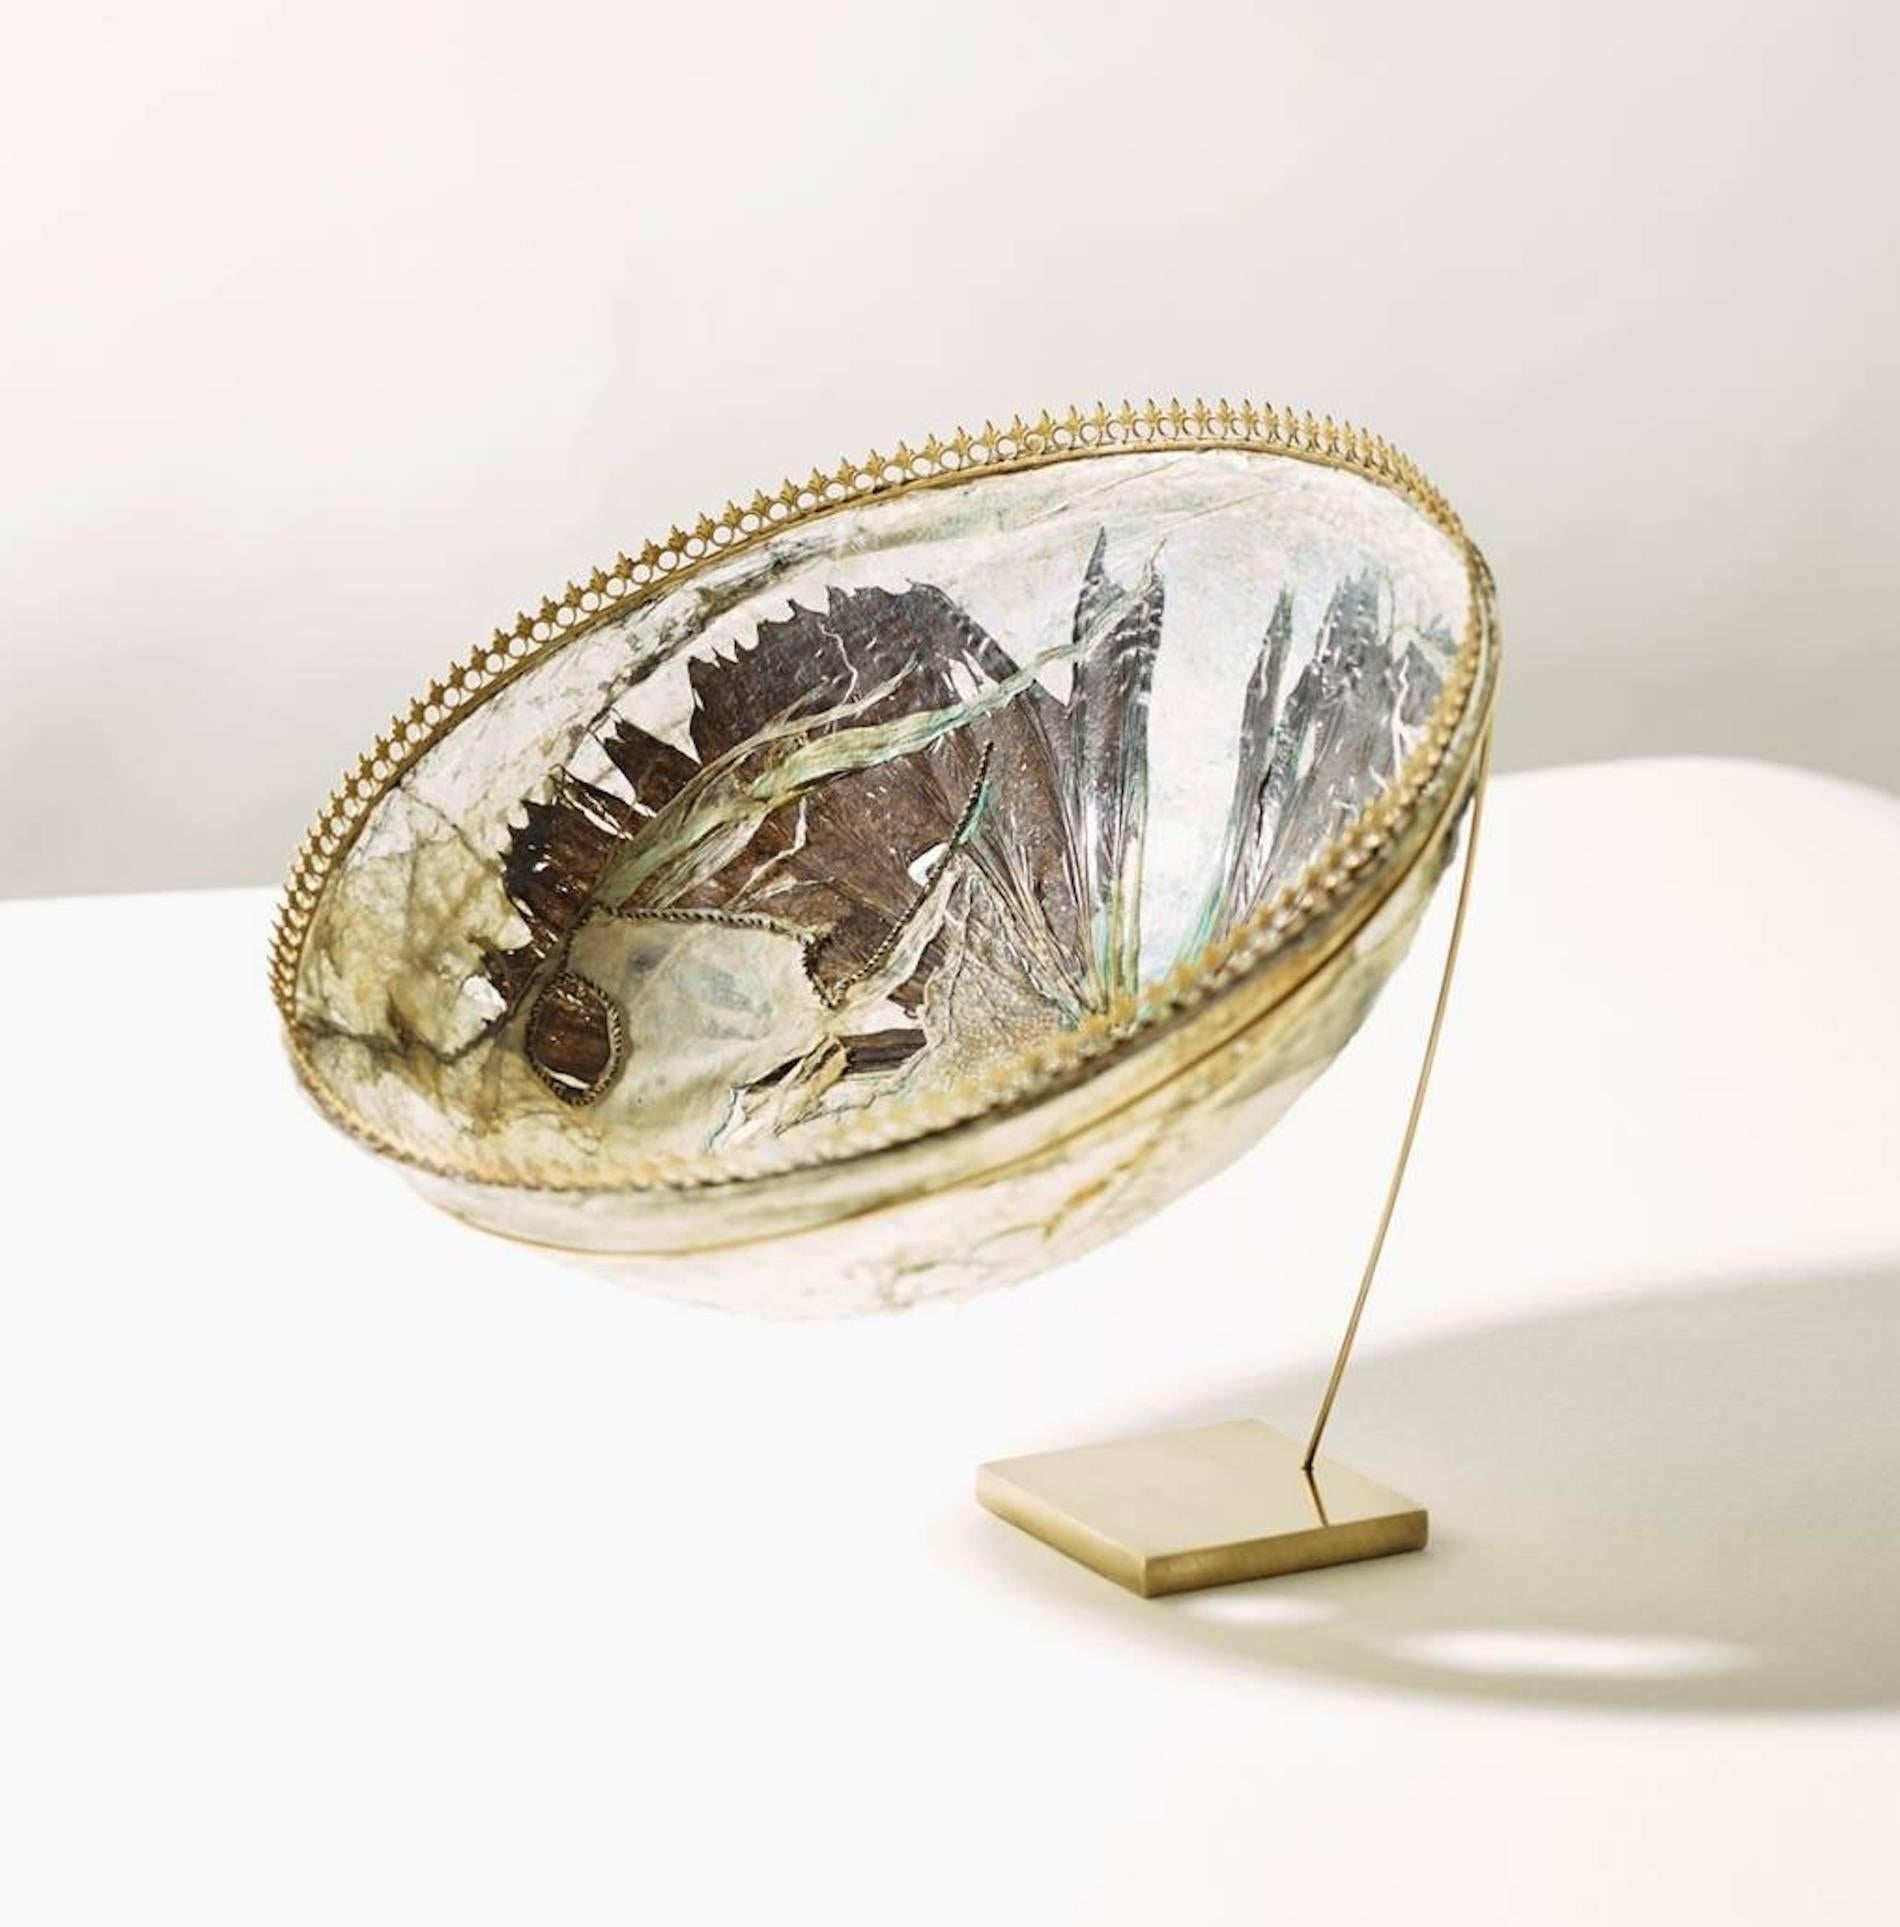 Transfiguration - exquisite fish leather bowl with brass filigree mount and rim - Mixed Media Art by Kari Furre